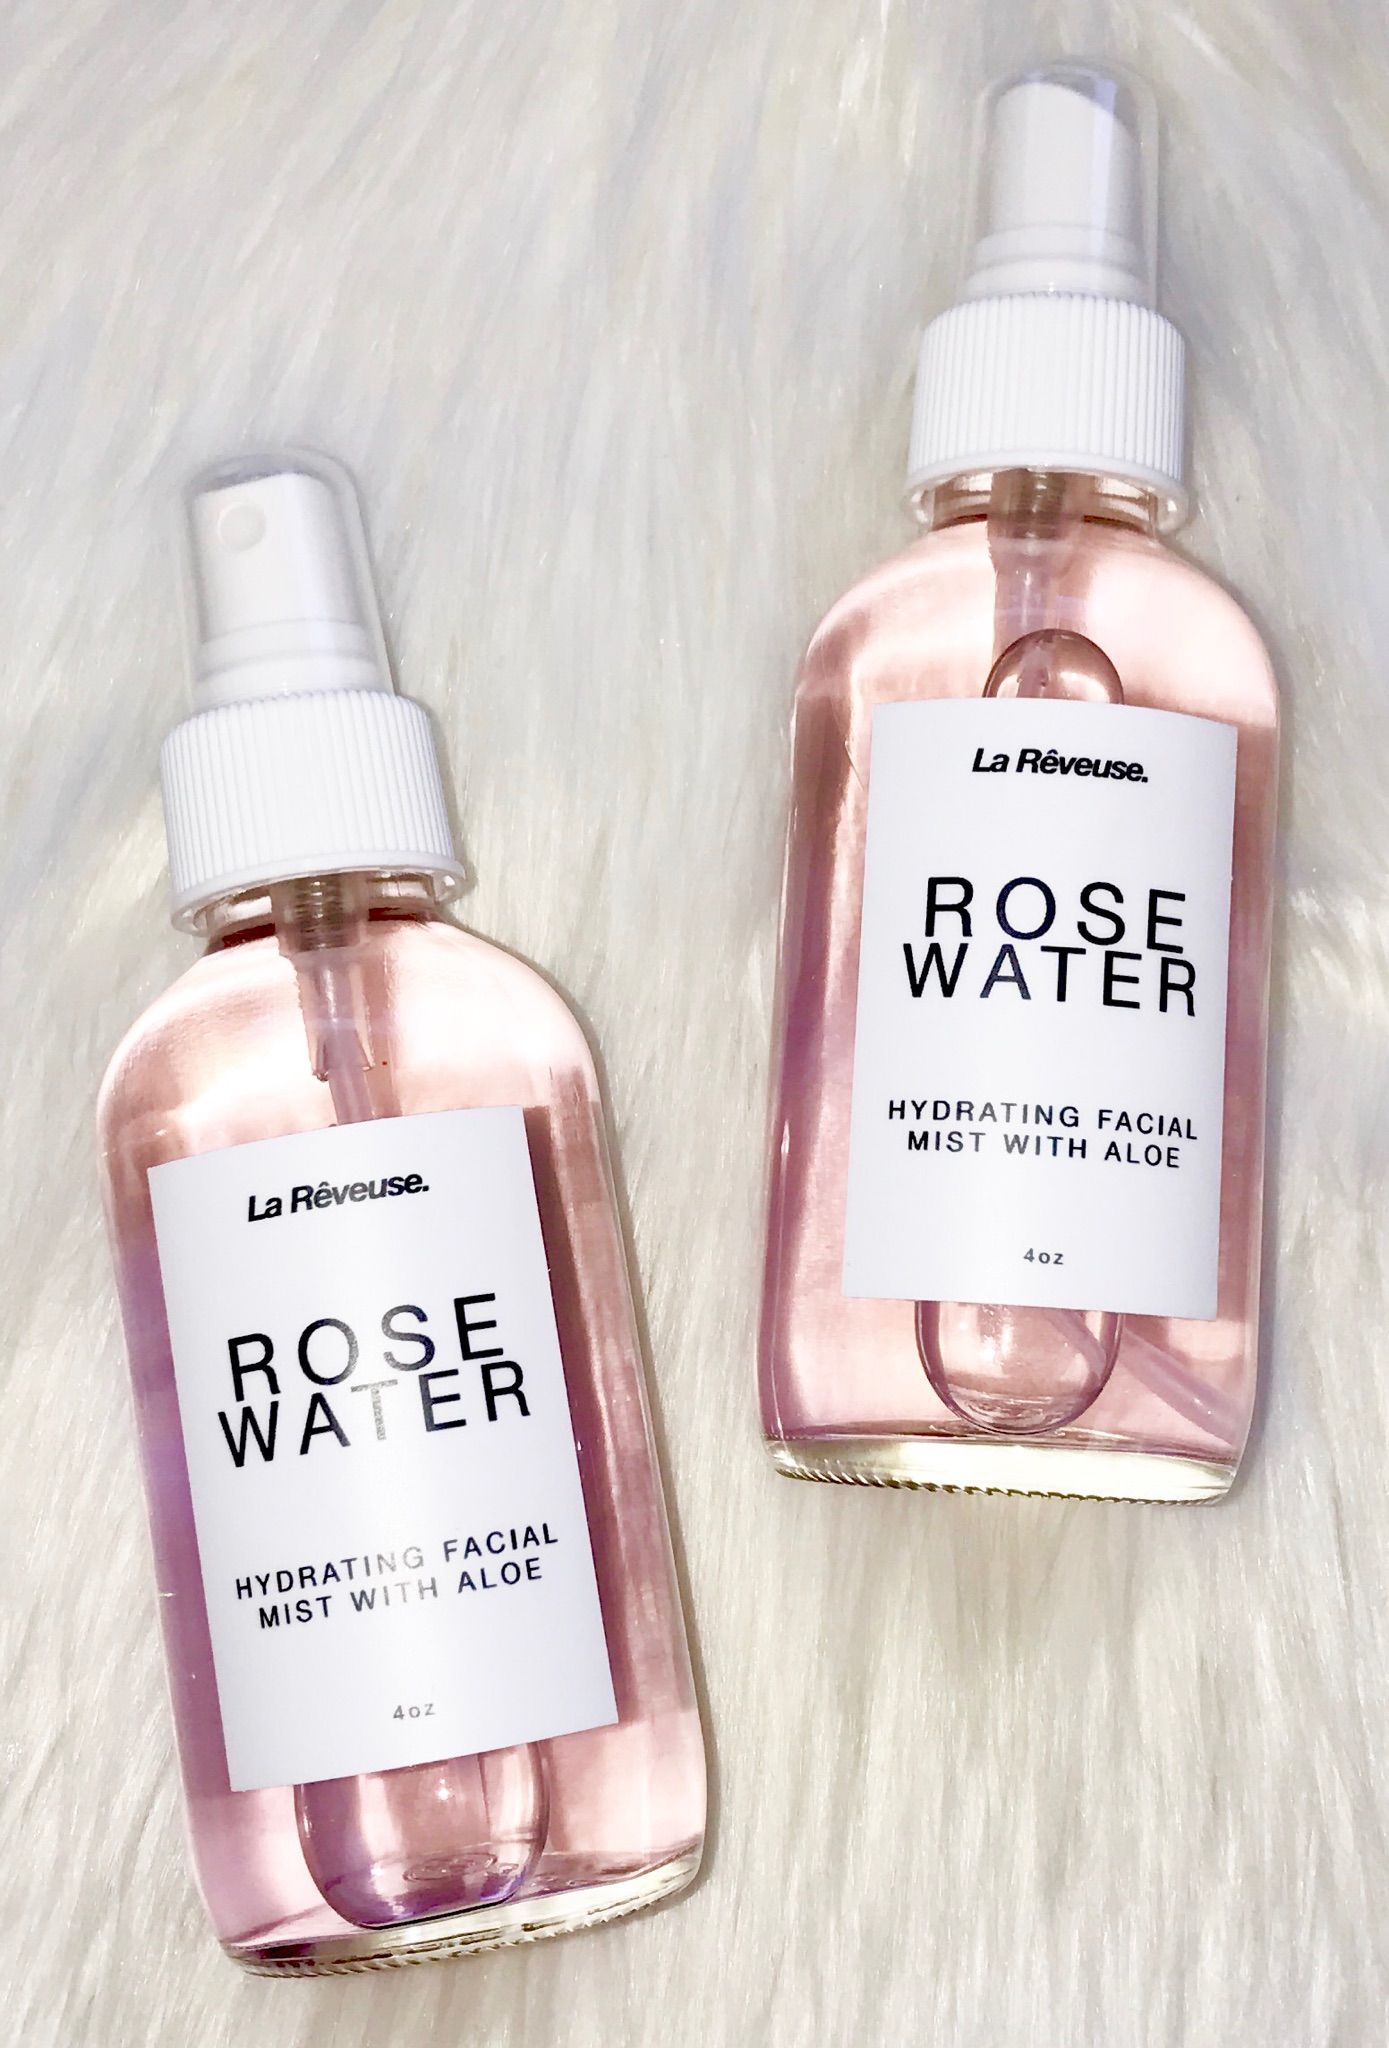 Our Rose Water Hydrating Facial Mist with Aloe will sooth and refresh your skin one spray at a time. Great for all skin types.